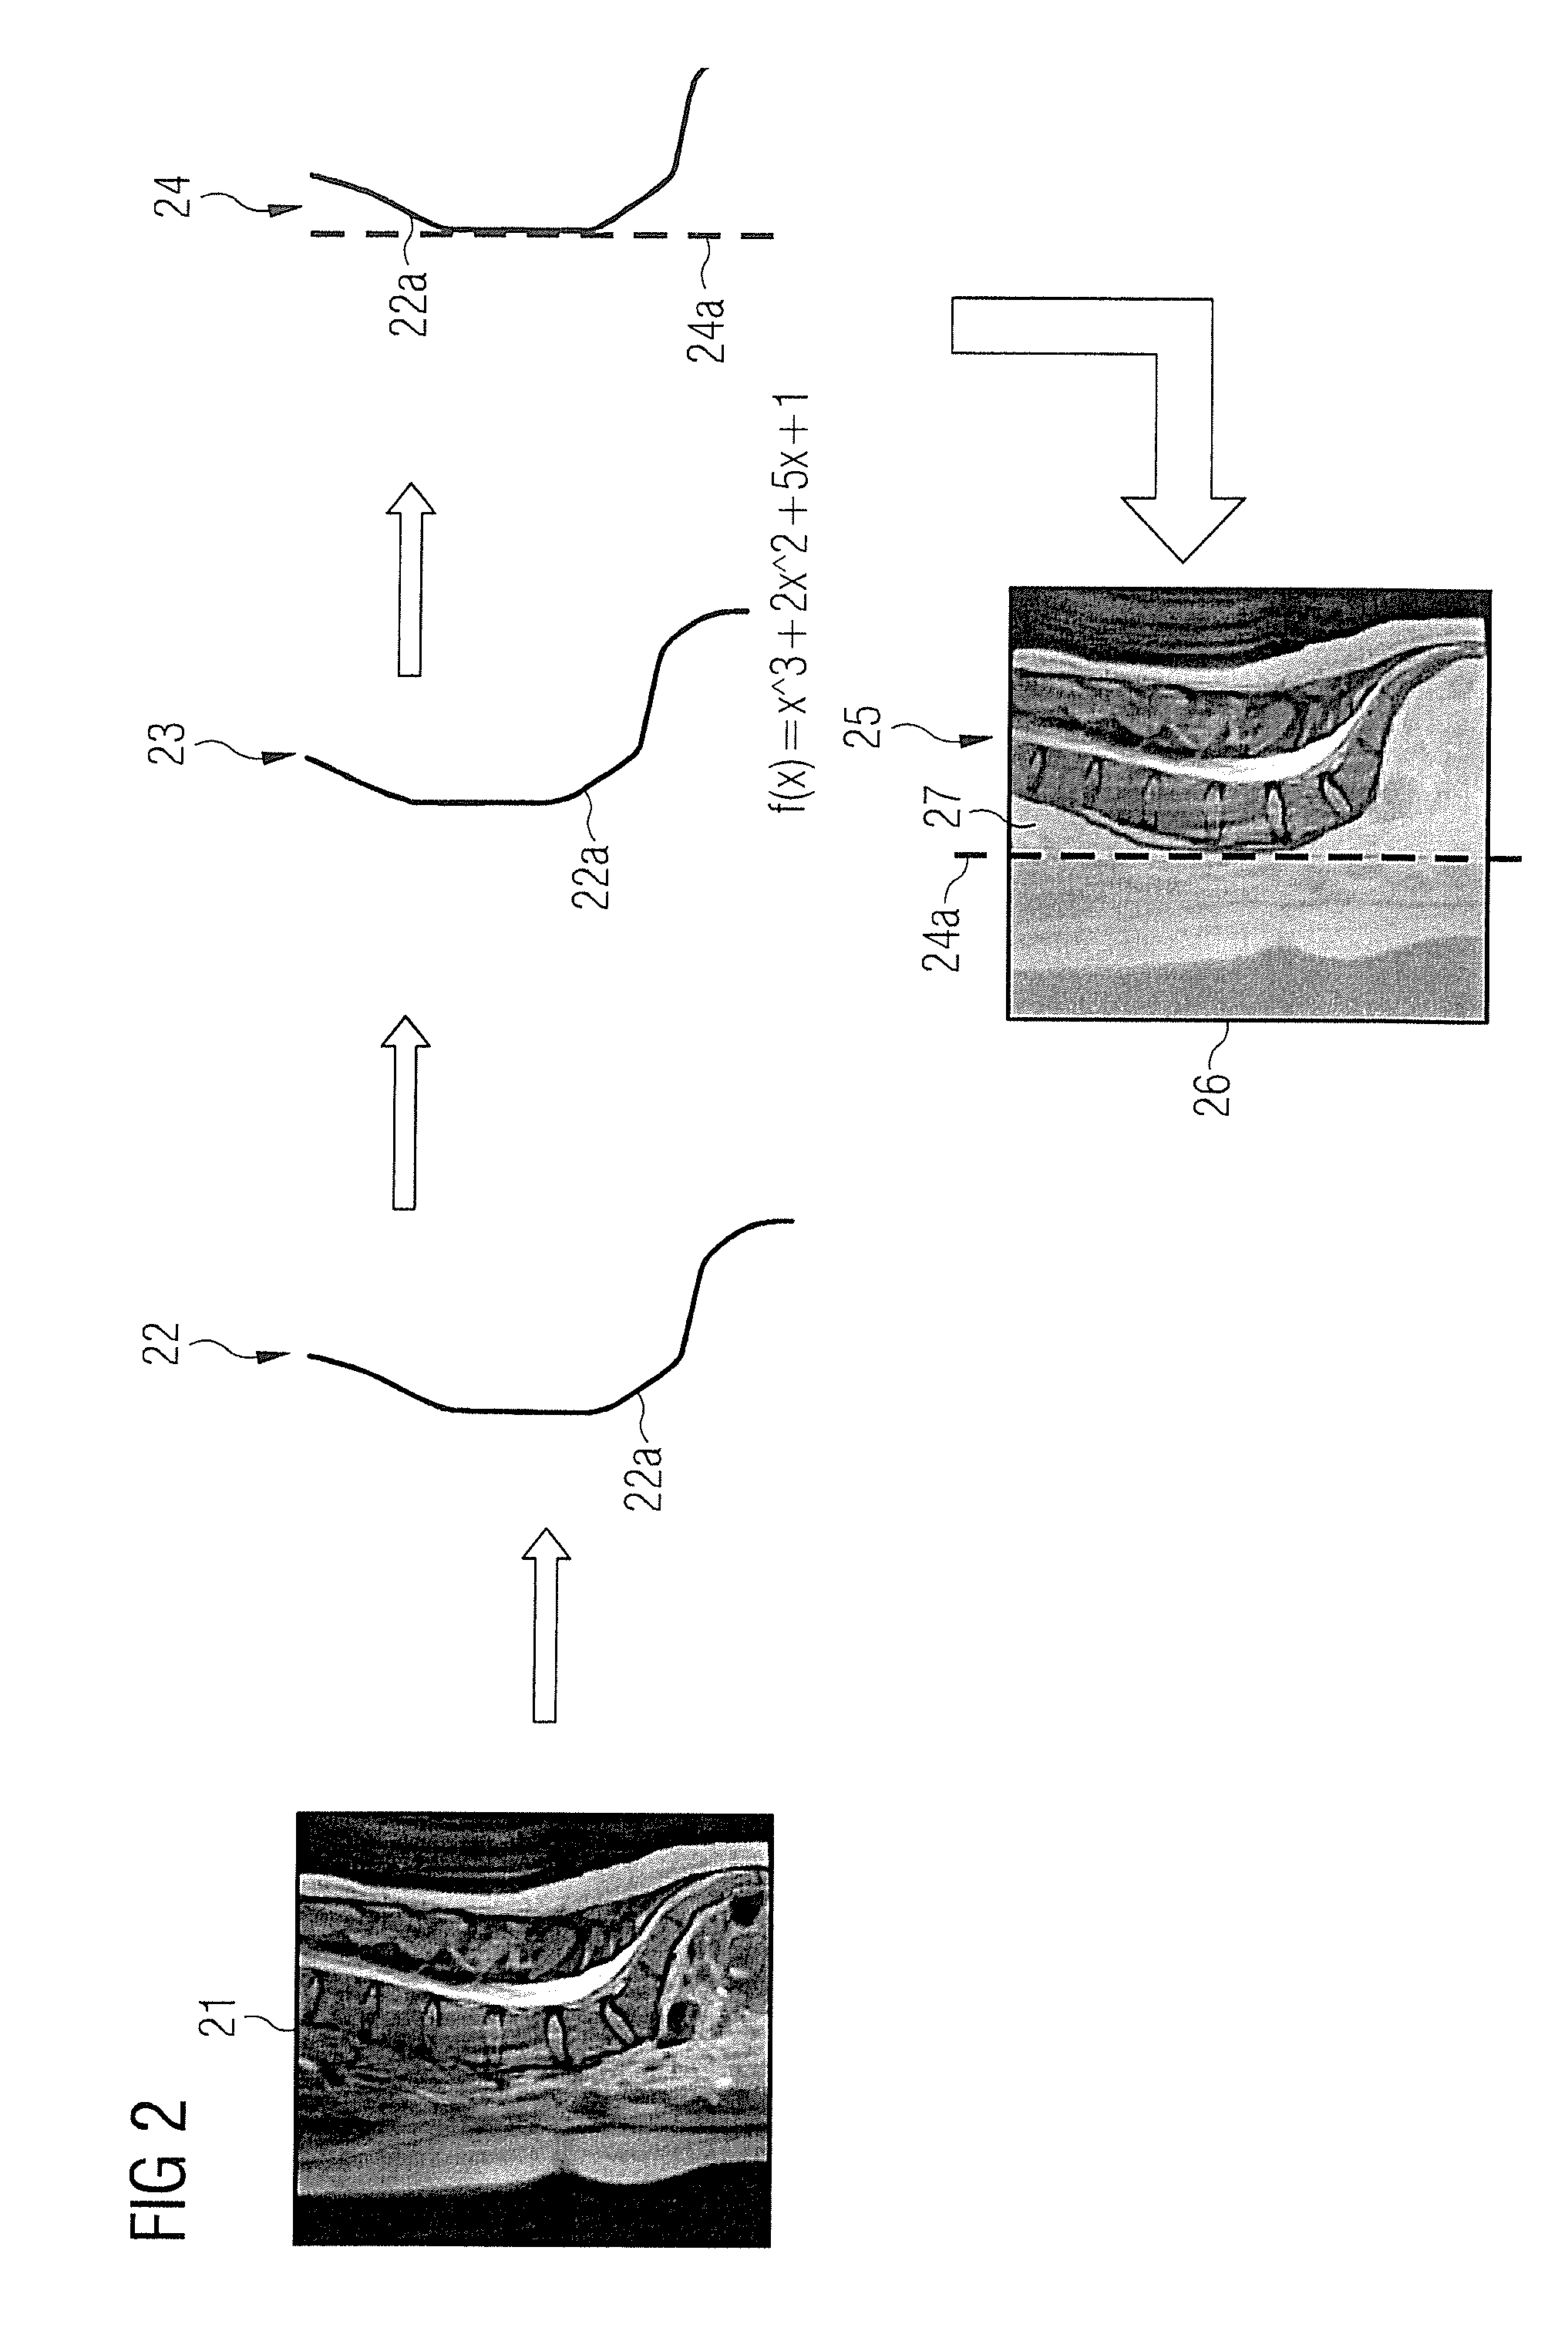 Magnetic resonance data acquisition method and apparatus saturation with spin dependent on the anatomical structures to be imaged